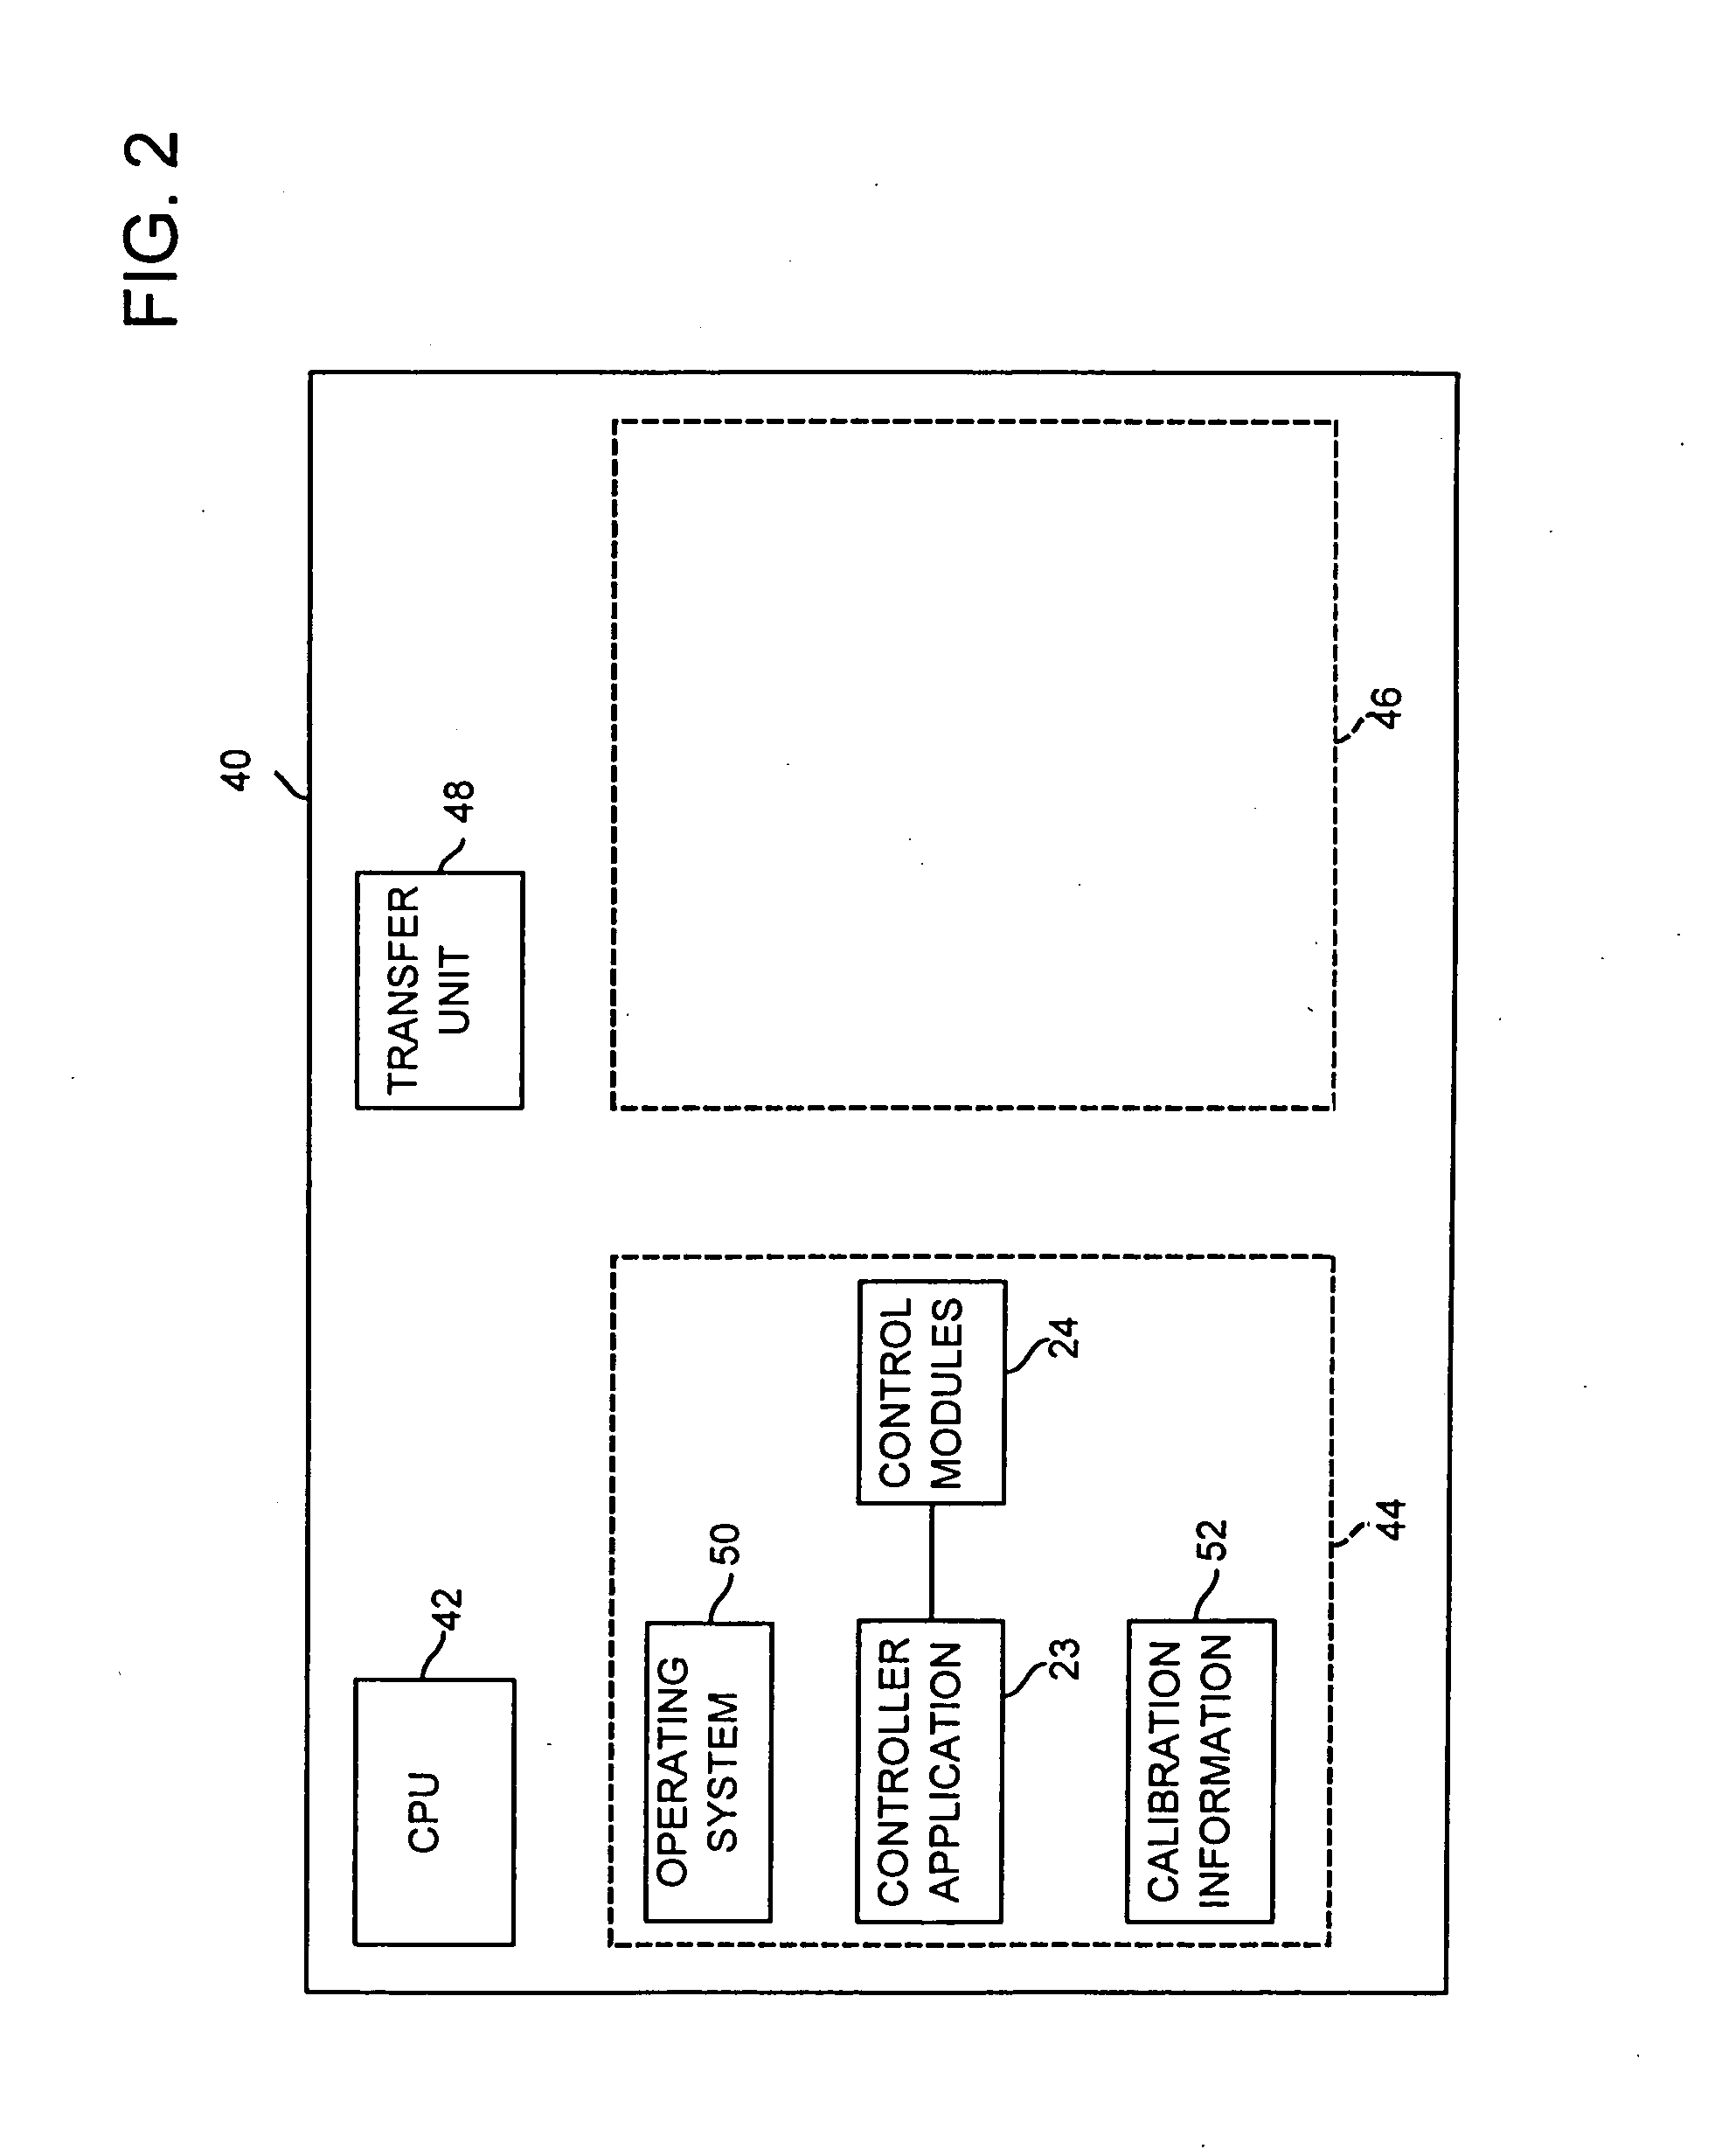 Downloadable code in a distributed process control system